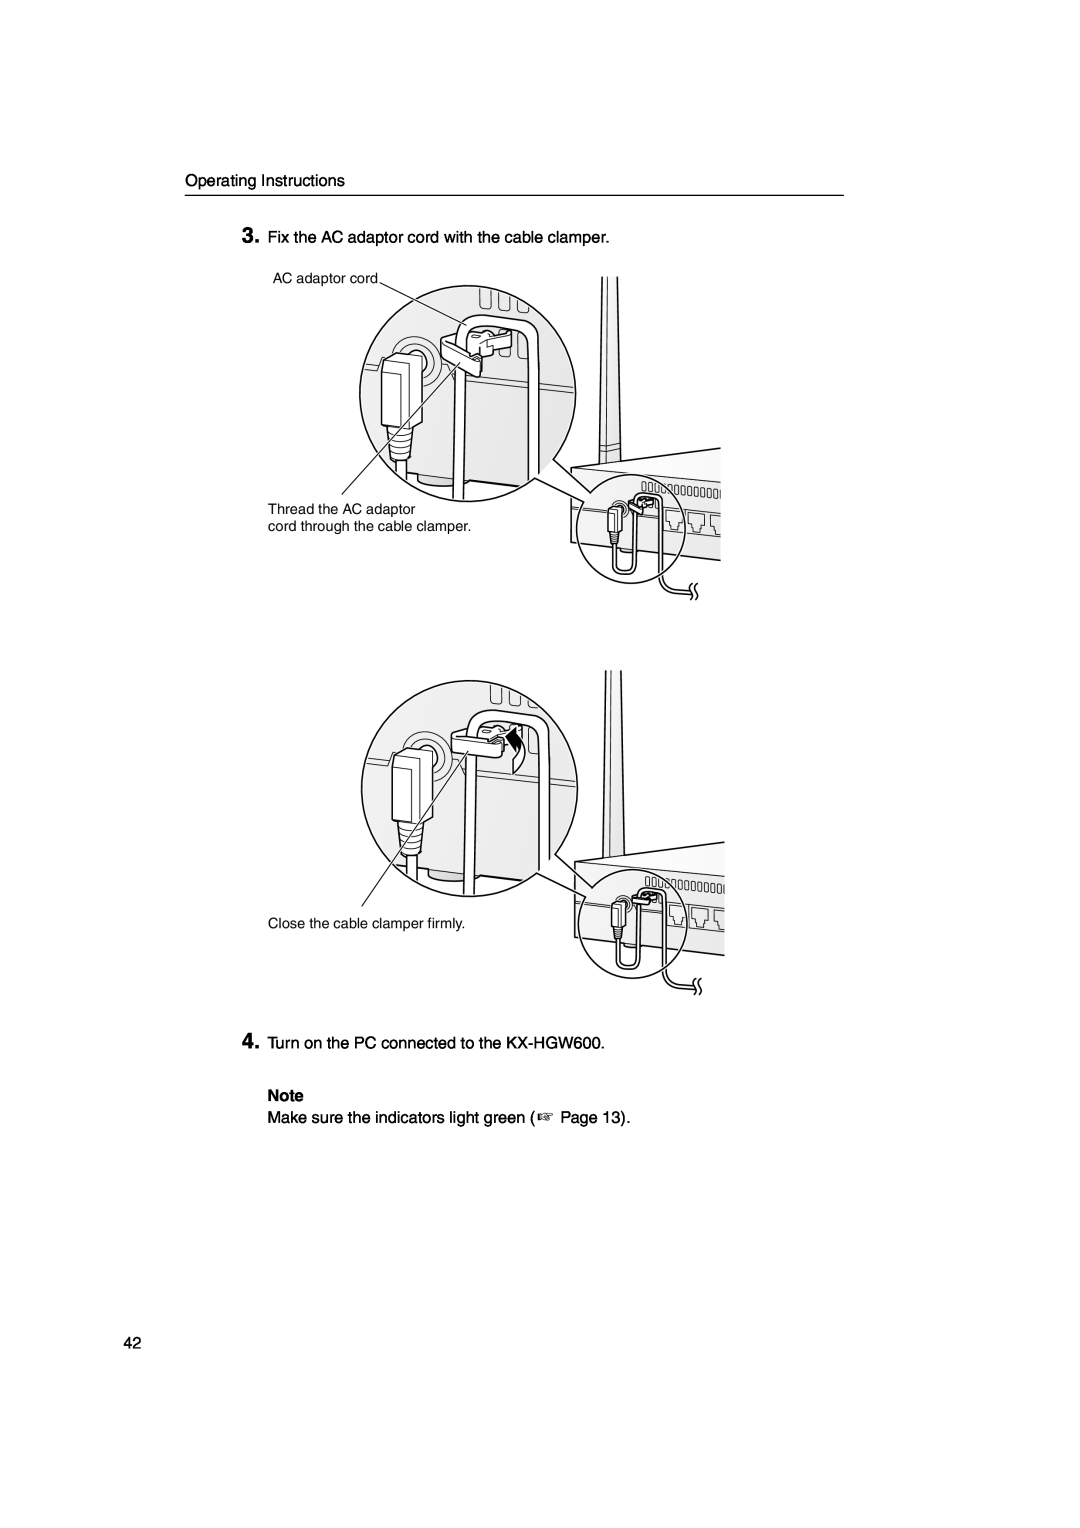 Panasonic KX-HGW600 Operating Instructions, Fix the AC adaptor cord with the cable clamper, Close the cable clamper firmly 